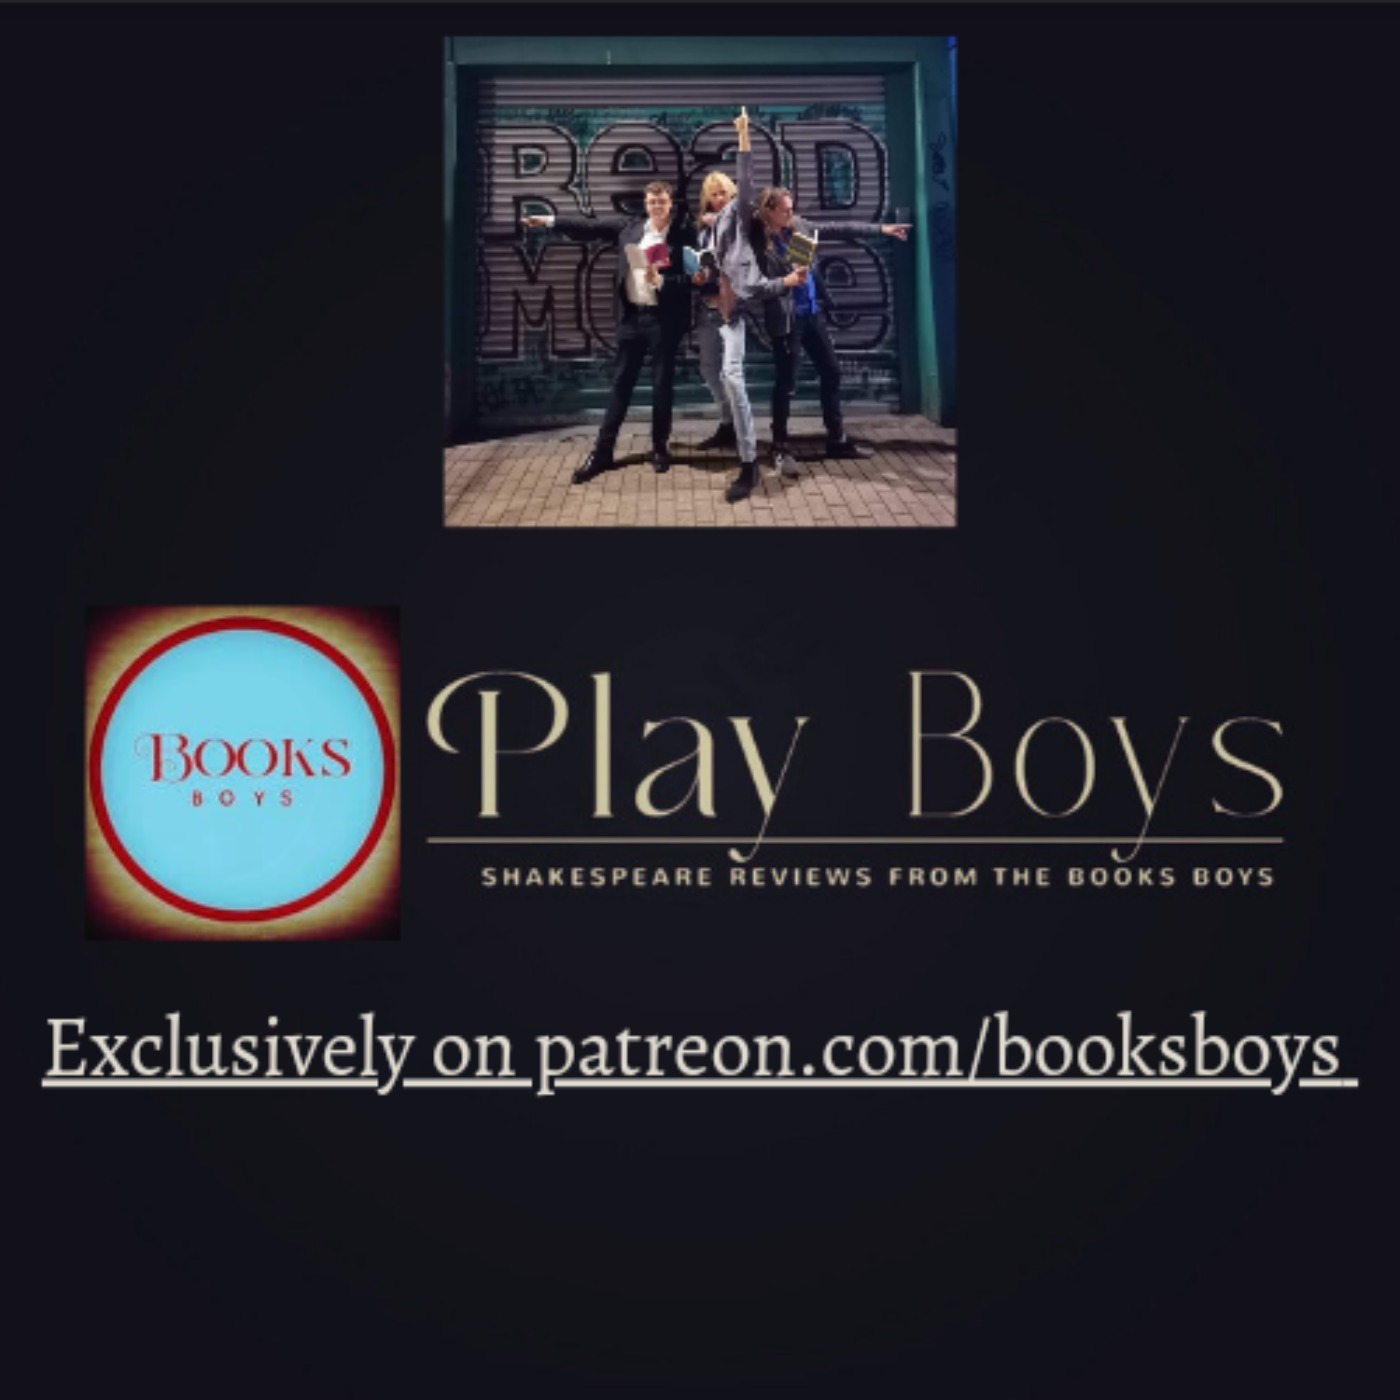 Playboys Episode 15: Much Ado About Nothing